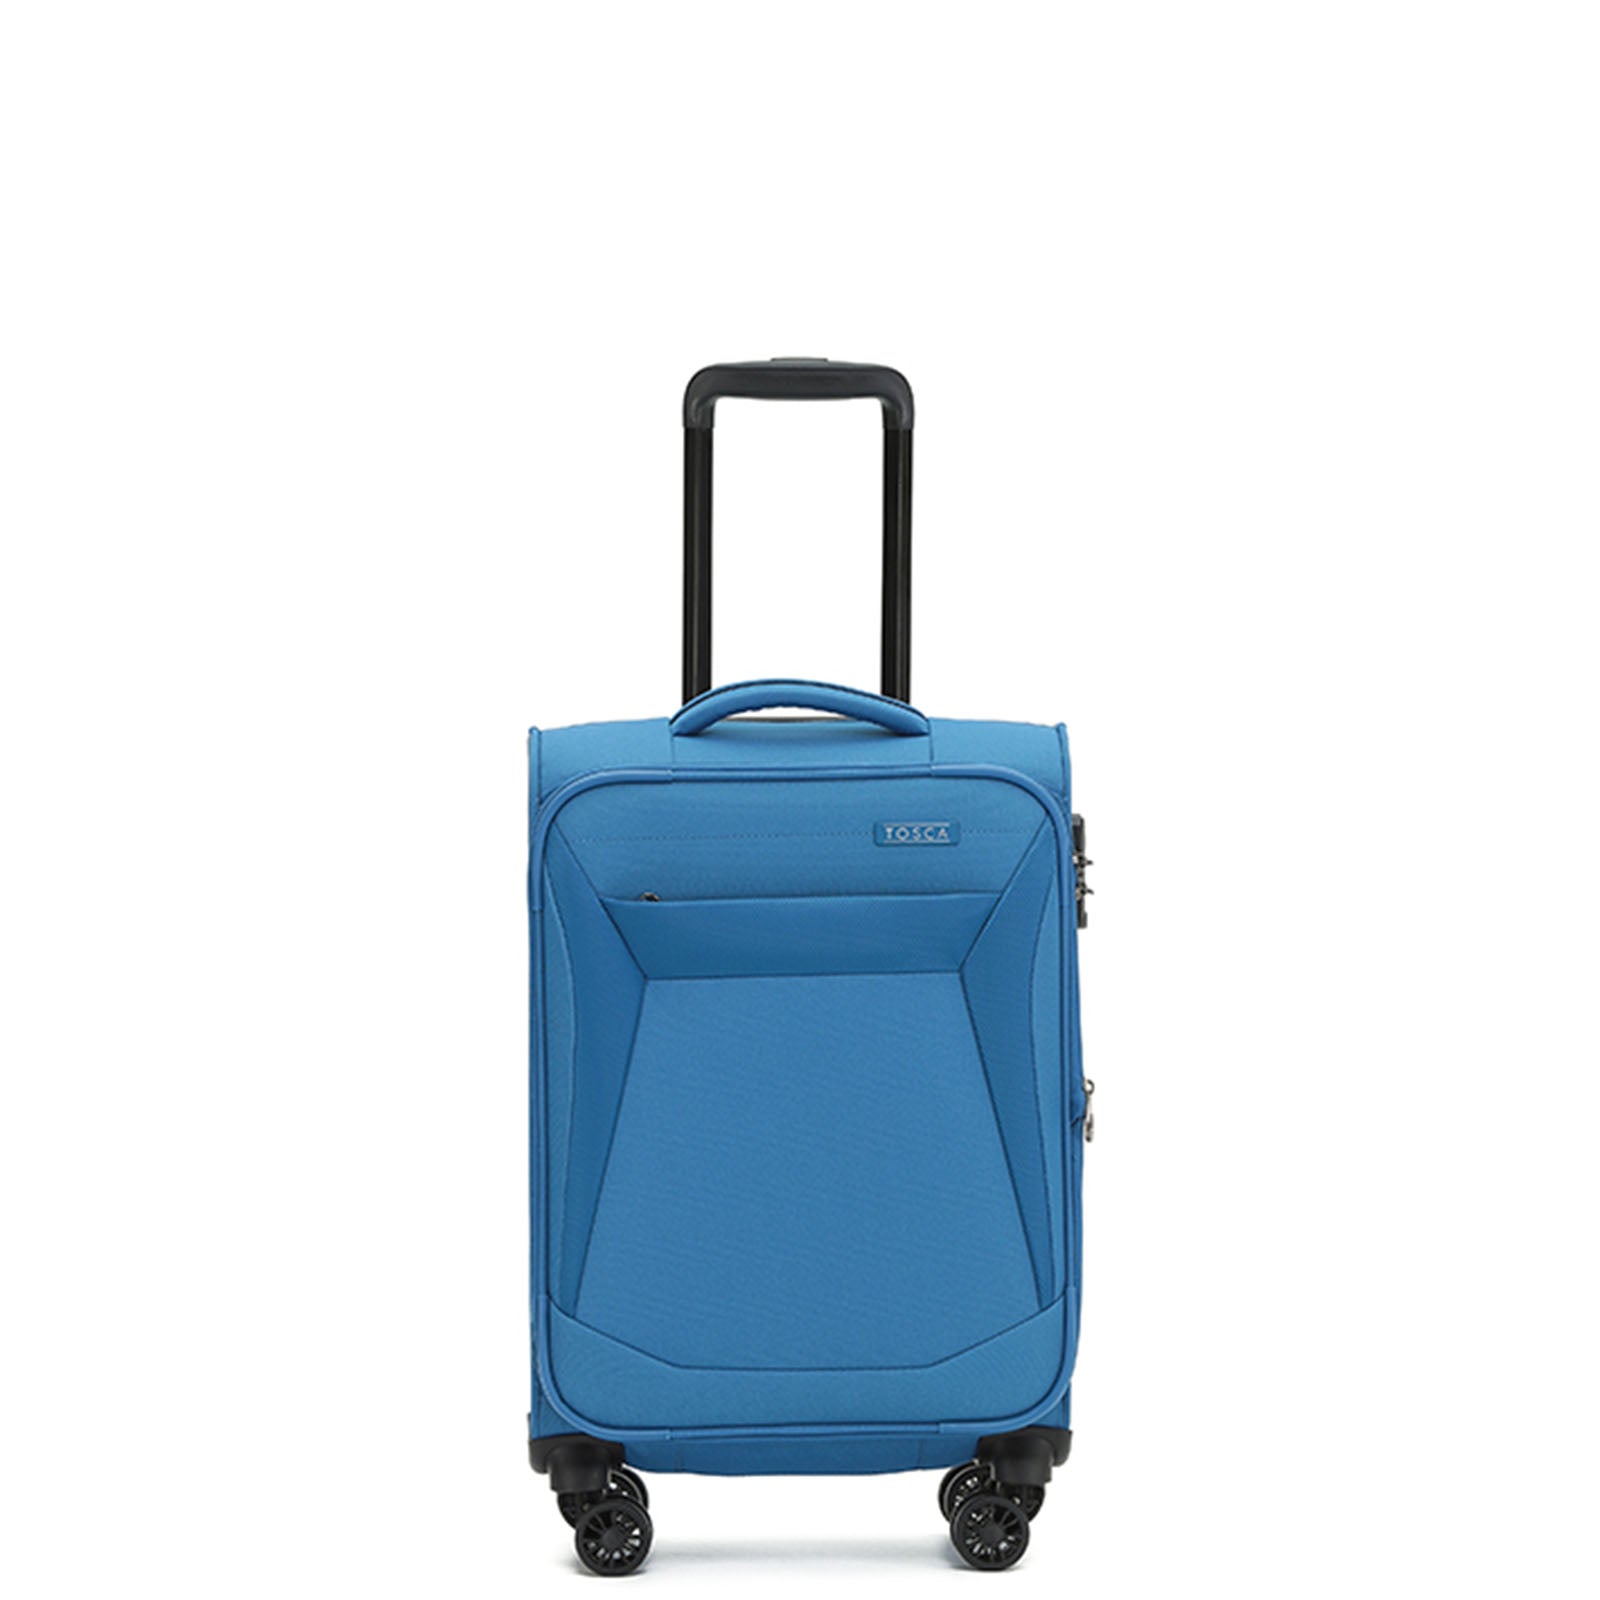 Tosca-Aviator-4-Wheel-Carry-On-Suitcase-Blue-Front